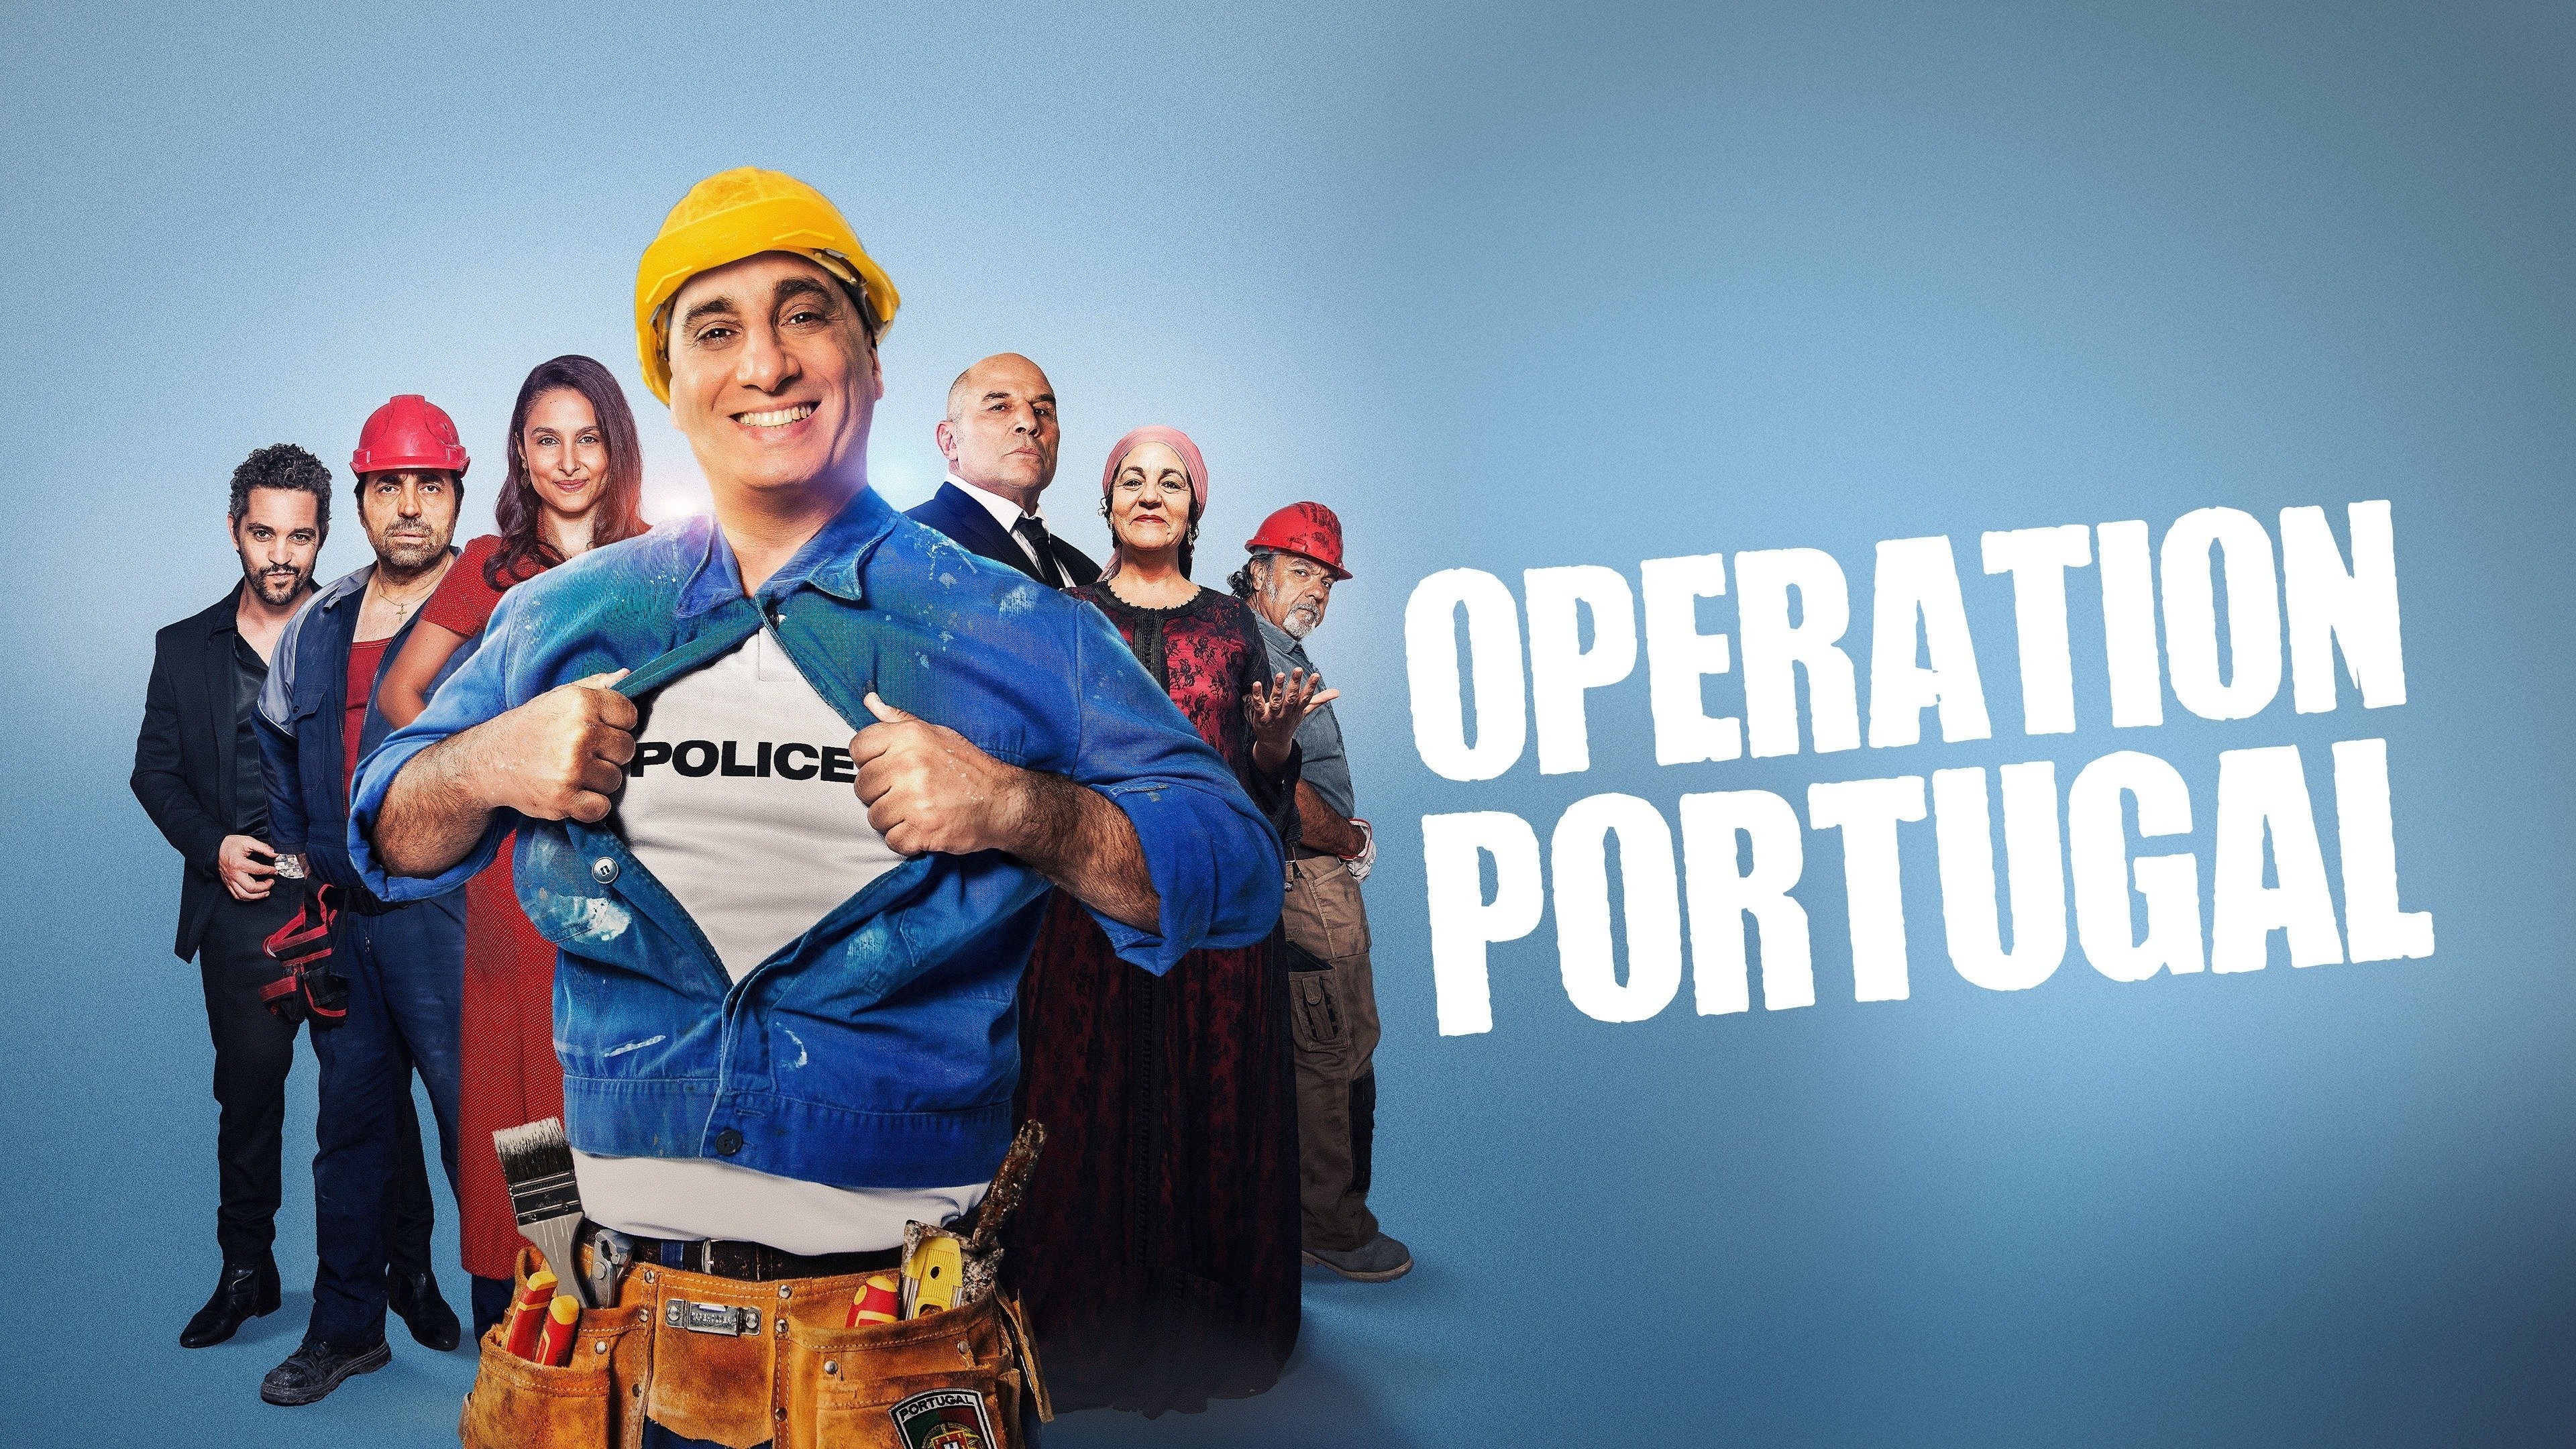 Operation Portugal is a 2021 comedy film directed by Frank Cimière